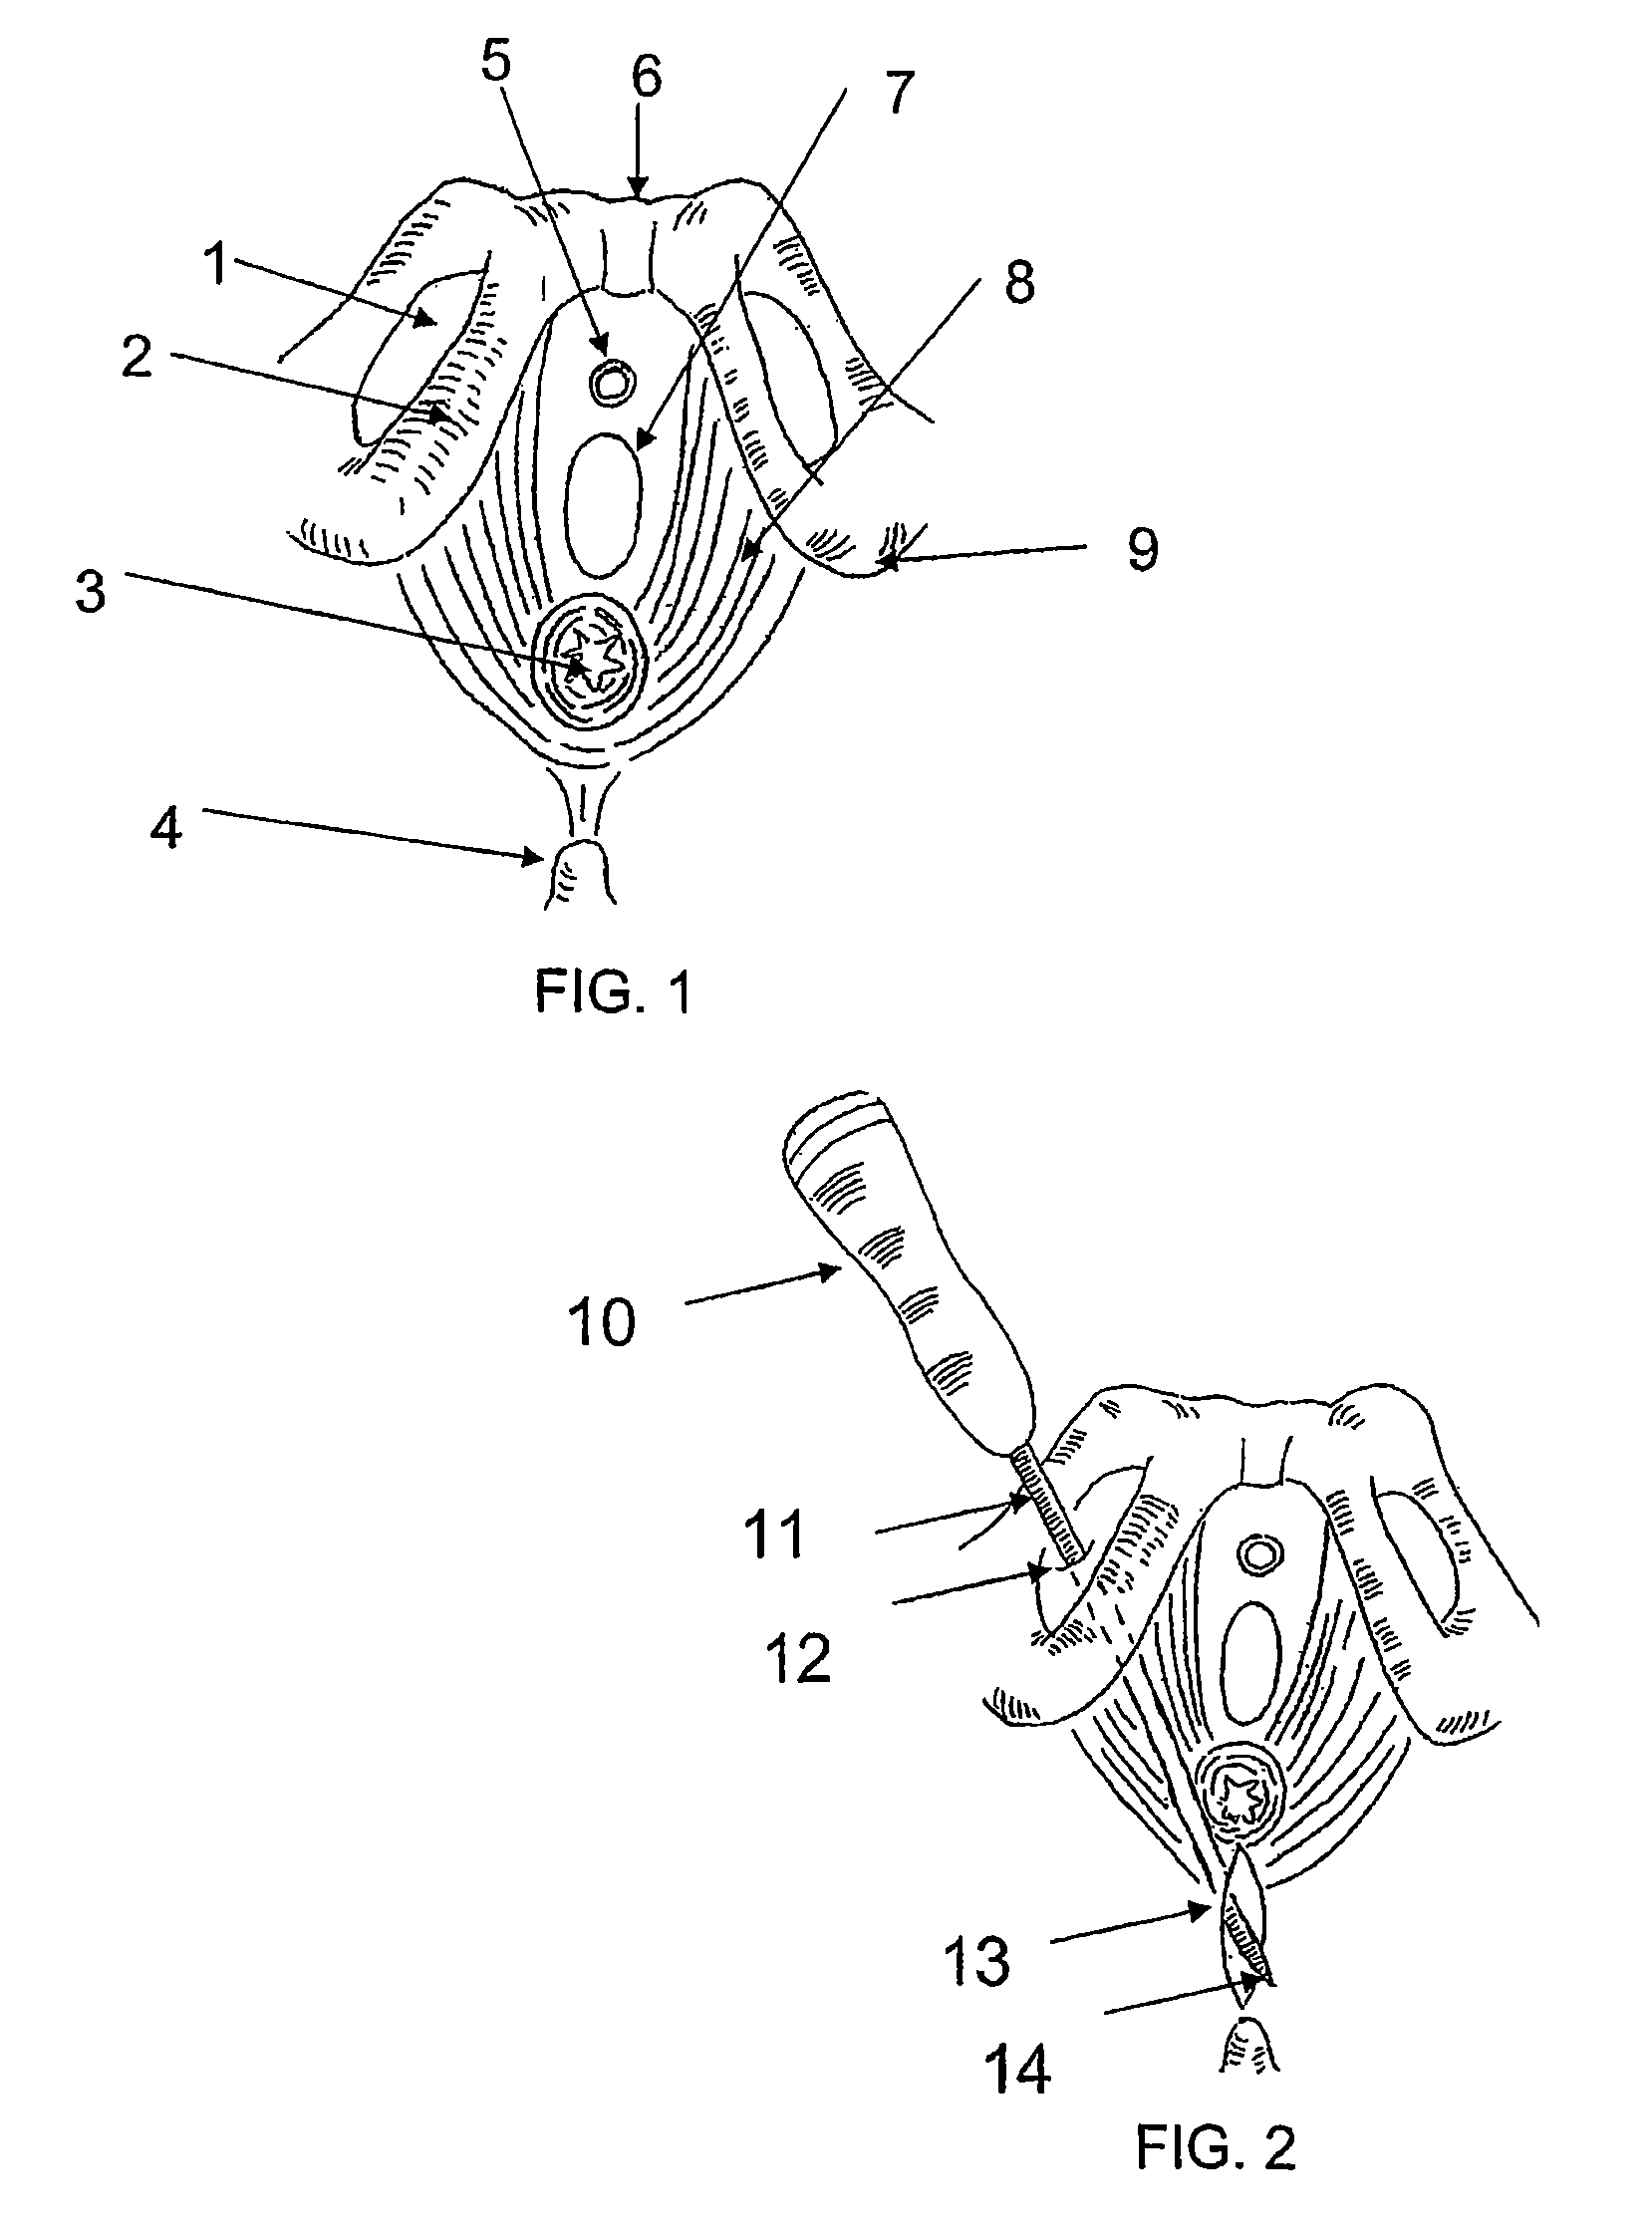 System and method for treatment of anal incontinence and pelvic organ prolapse